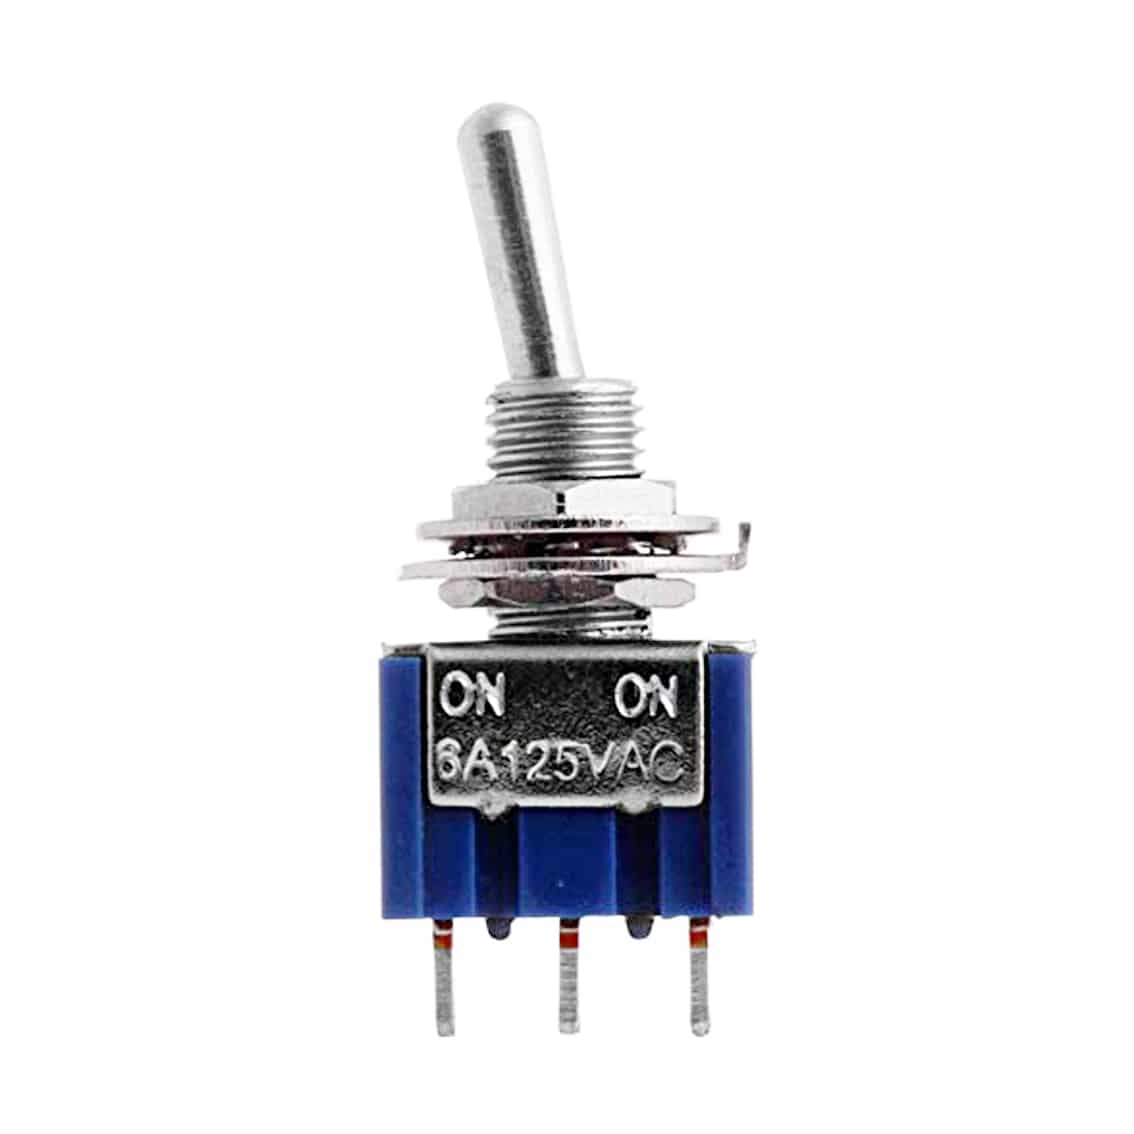 UIOTEC 2Pcs Mts-102 3-Pin SPDT On-On AC 125V 6A Mini Toggle Switches